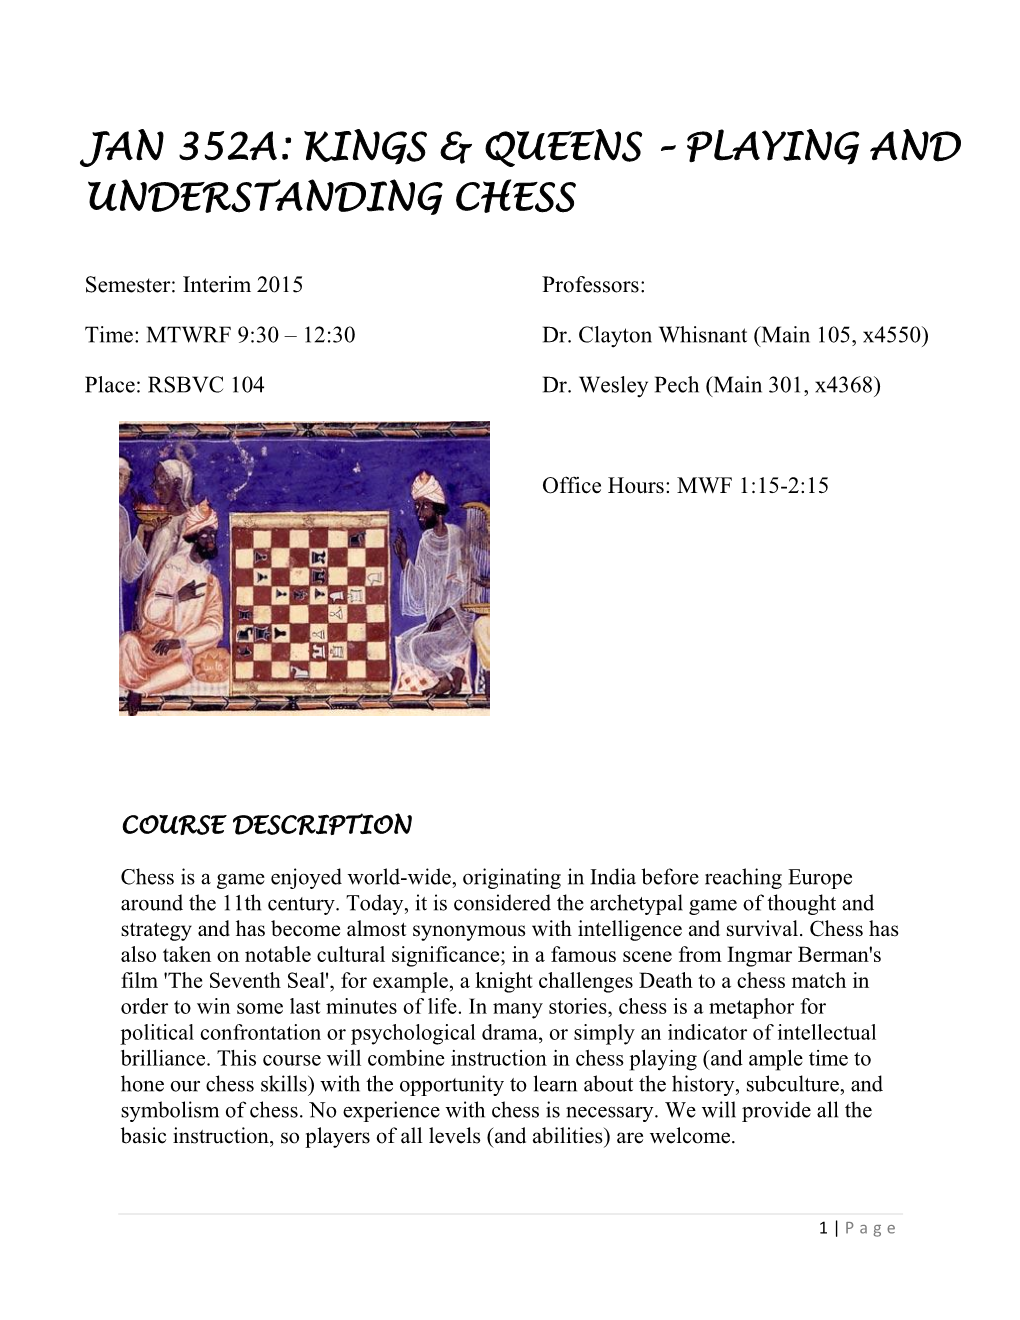 Playing and Understanding Chess